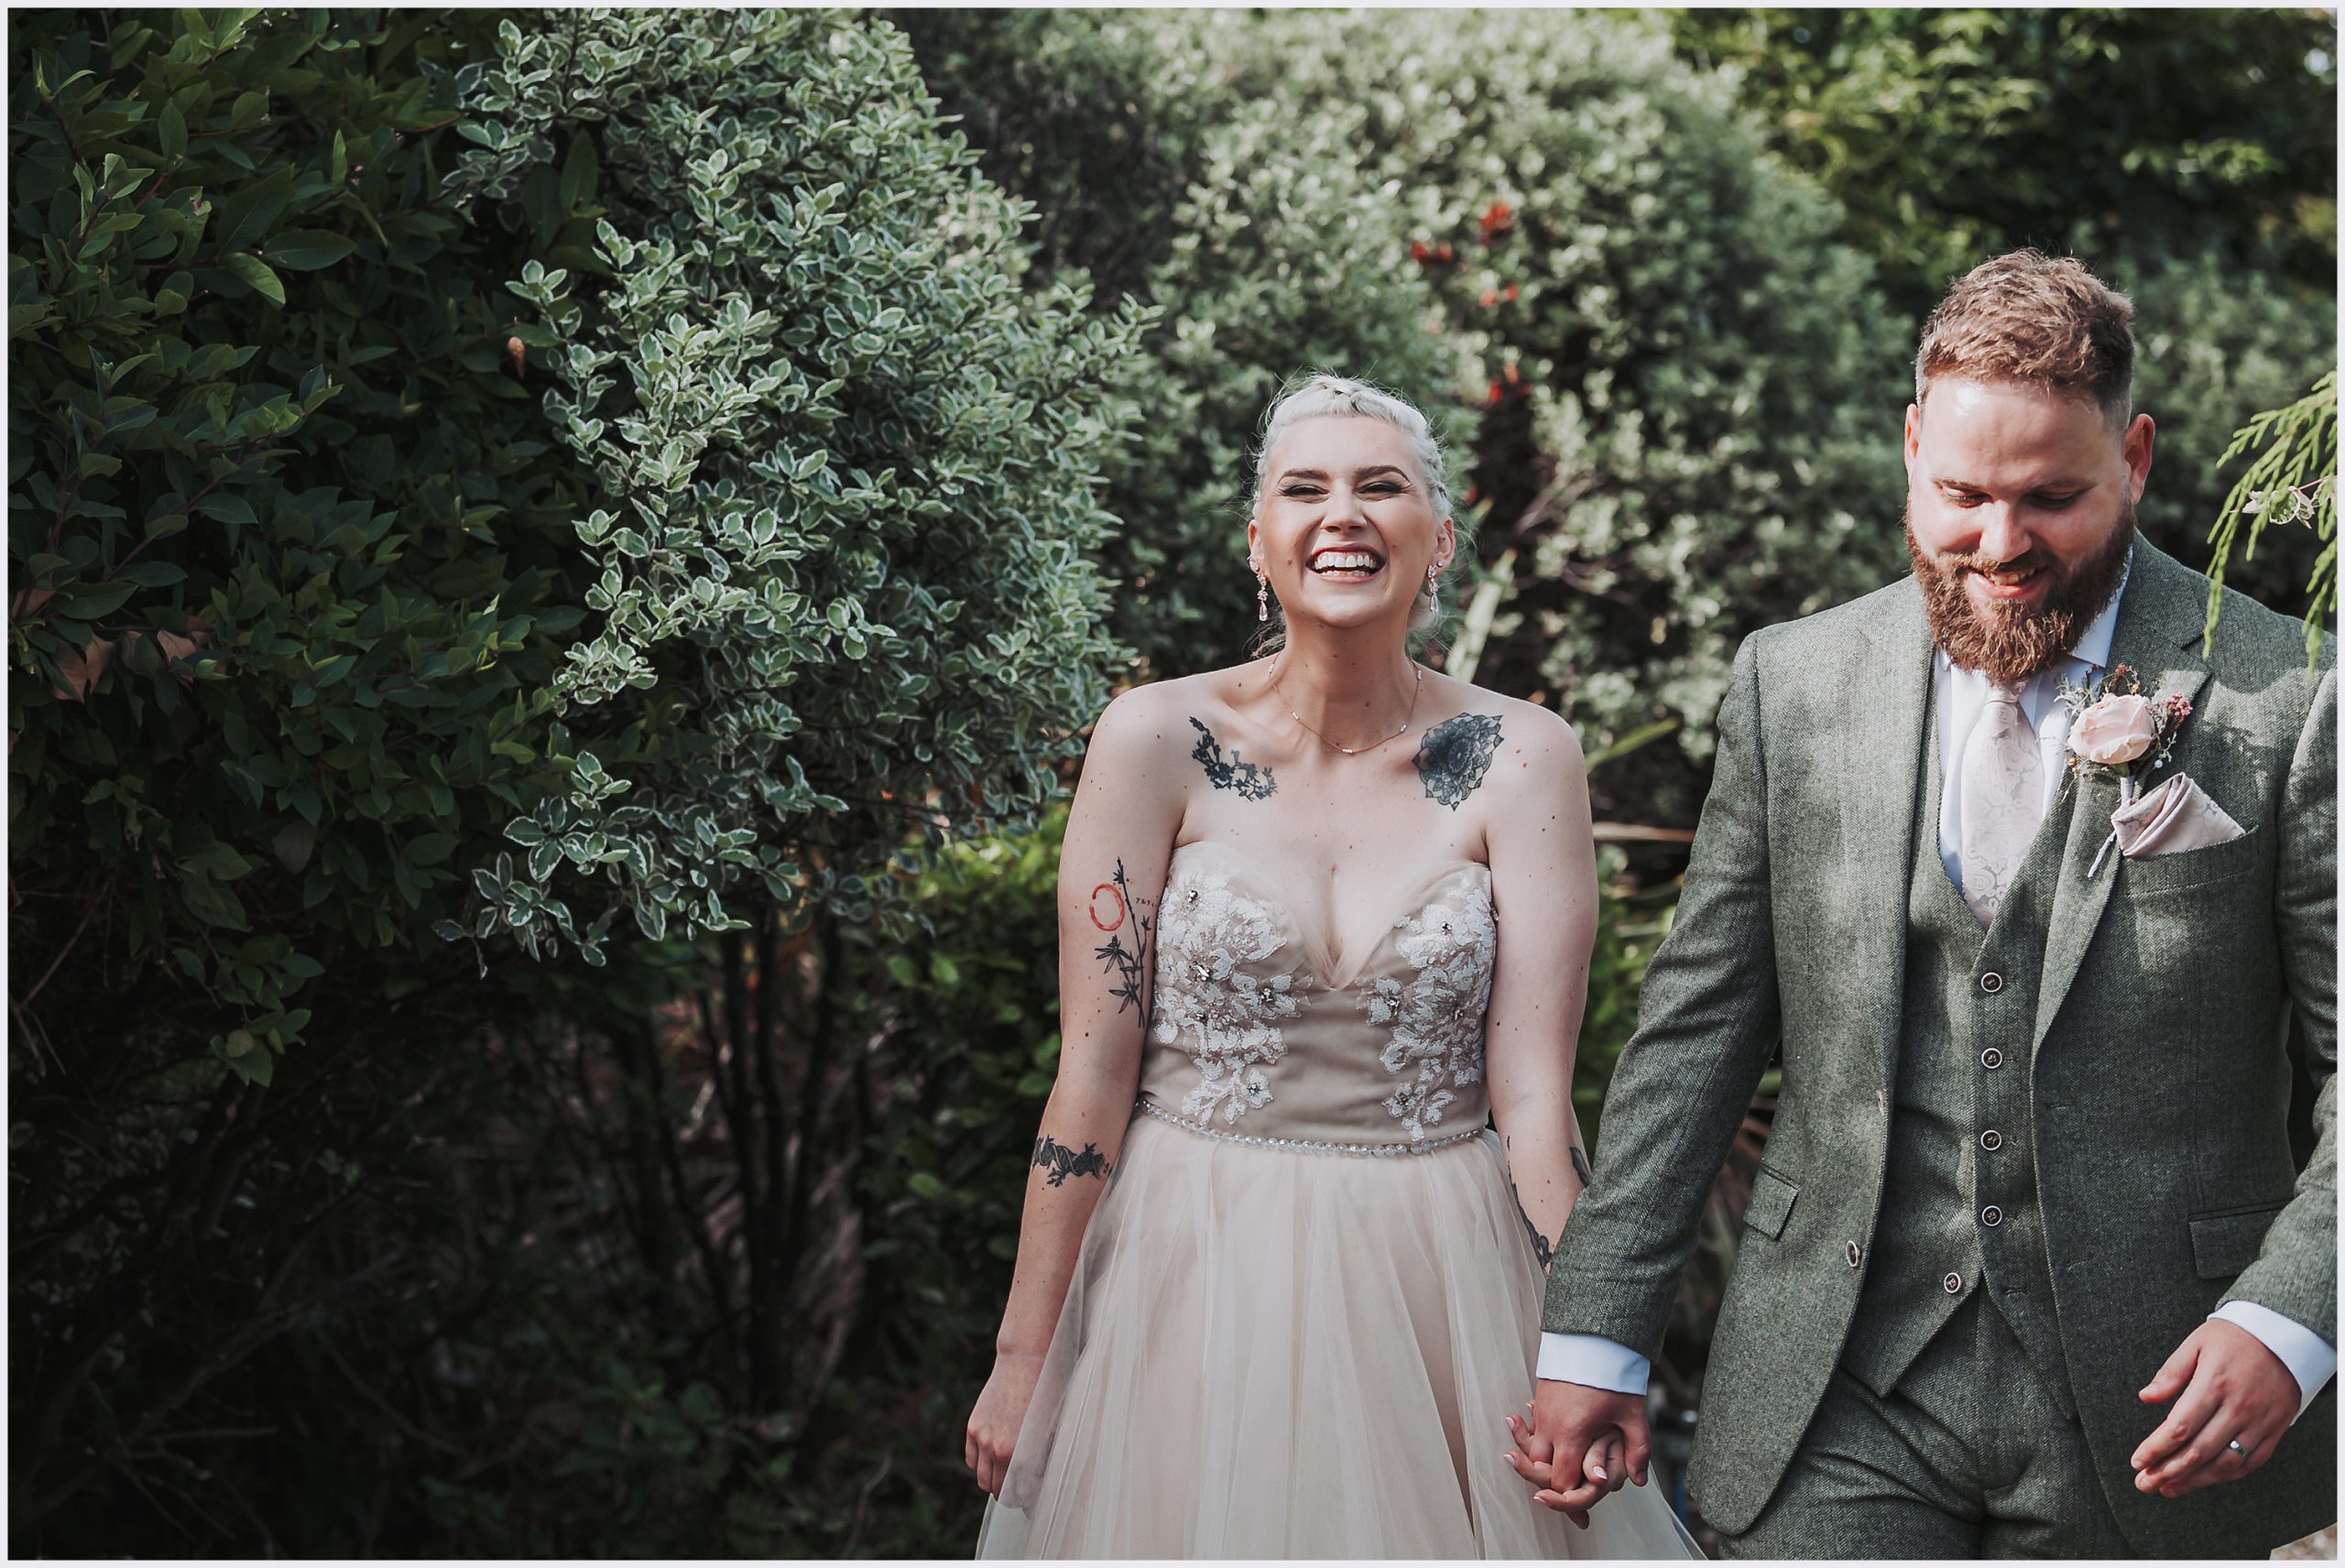 North Wales' Love Affair: Bride and Groom's Unforgettable Wedding Moment. A bride laughs and looks so happy as she walks along hand in hand with her husband at The Grosvenor Pulford Hotel and Spa